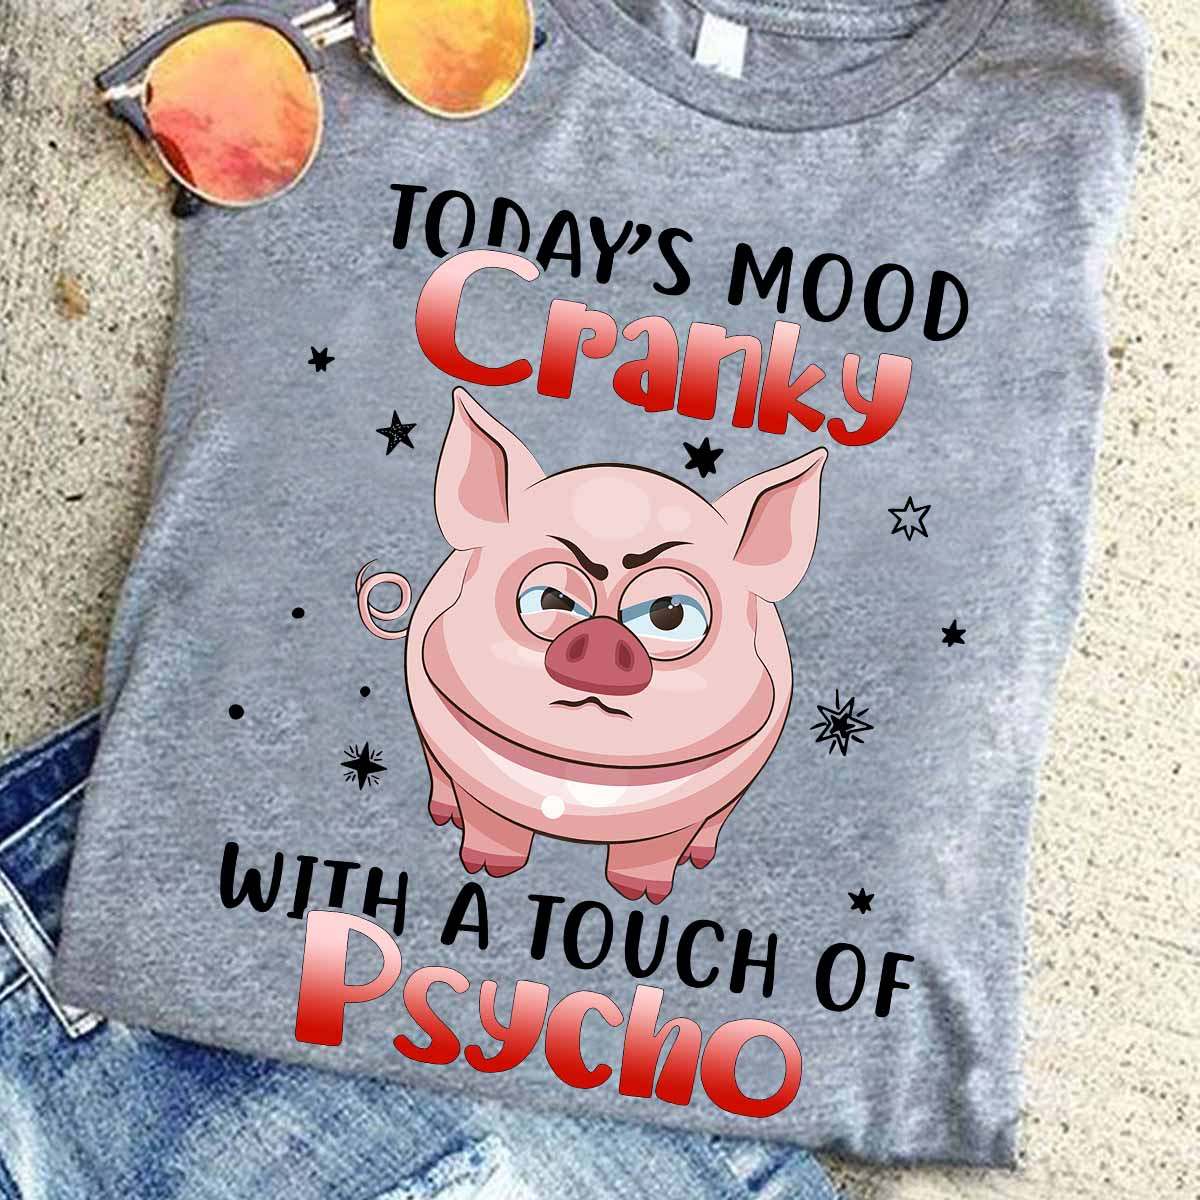 Grumpy Pig - Today's mood cranky with a touch of psycho